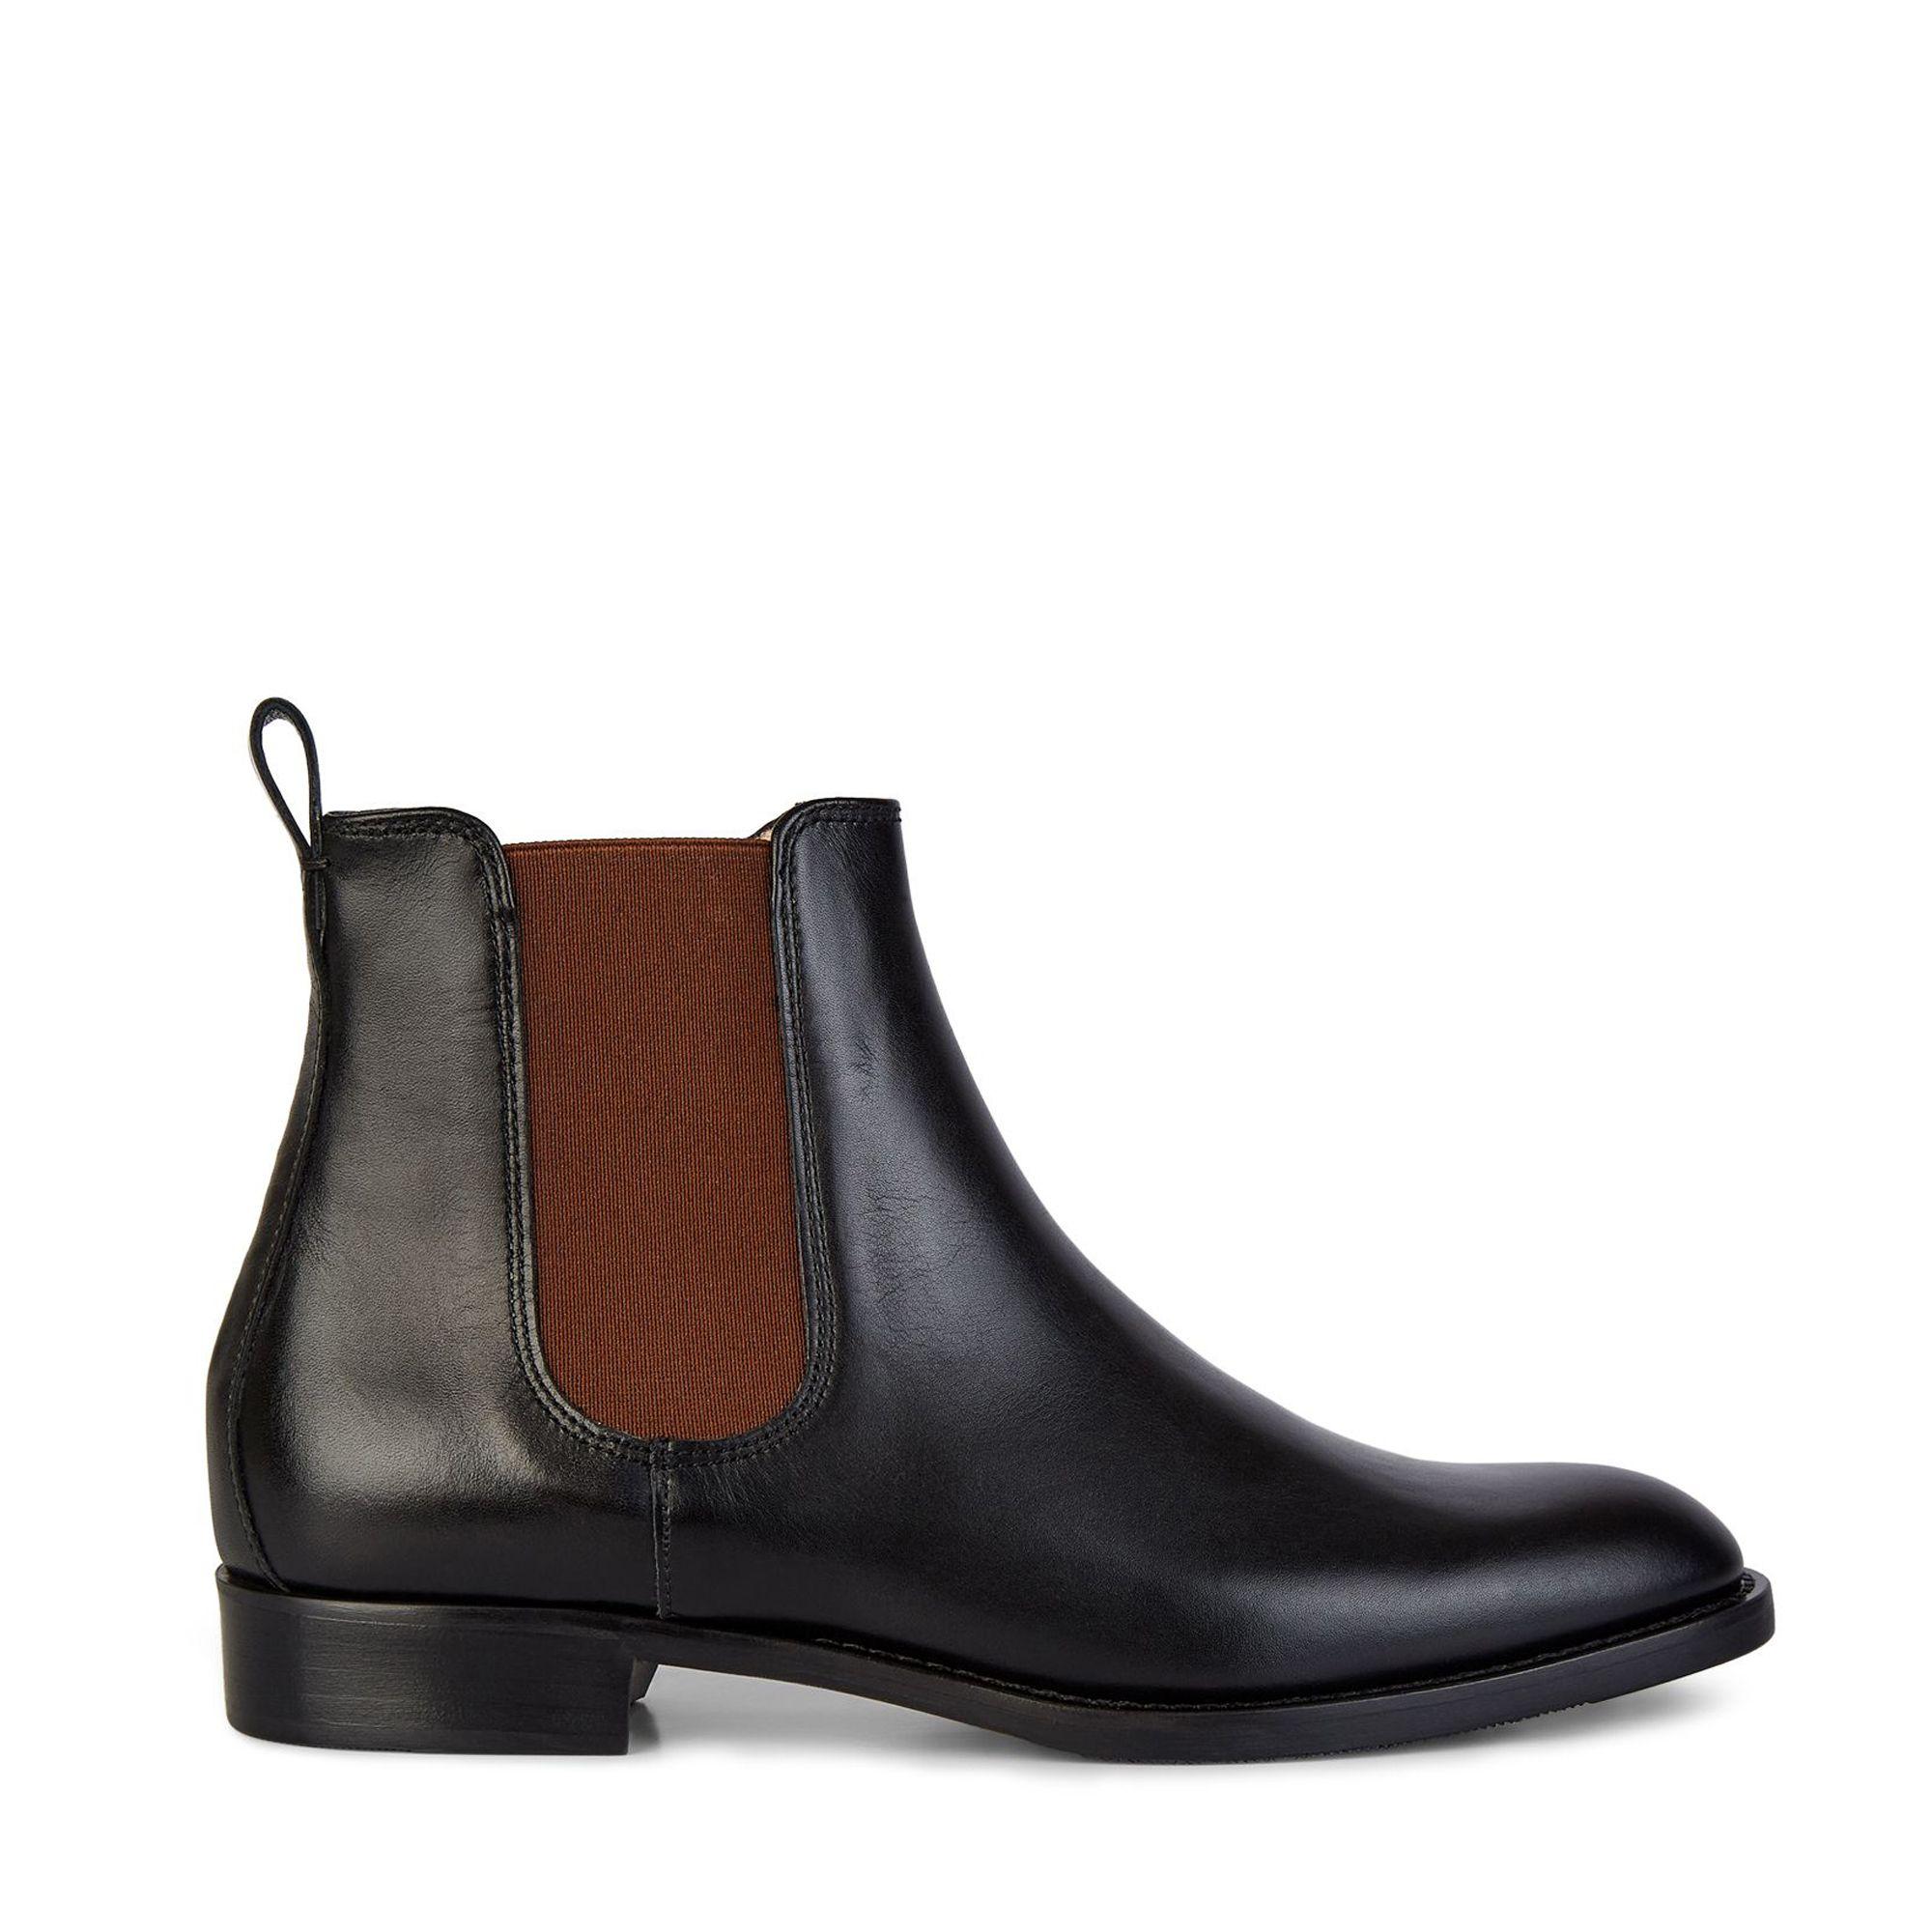 Hobbs Leather Nicole Boot in Black - Lyst